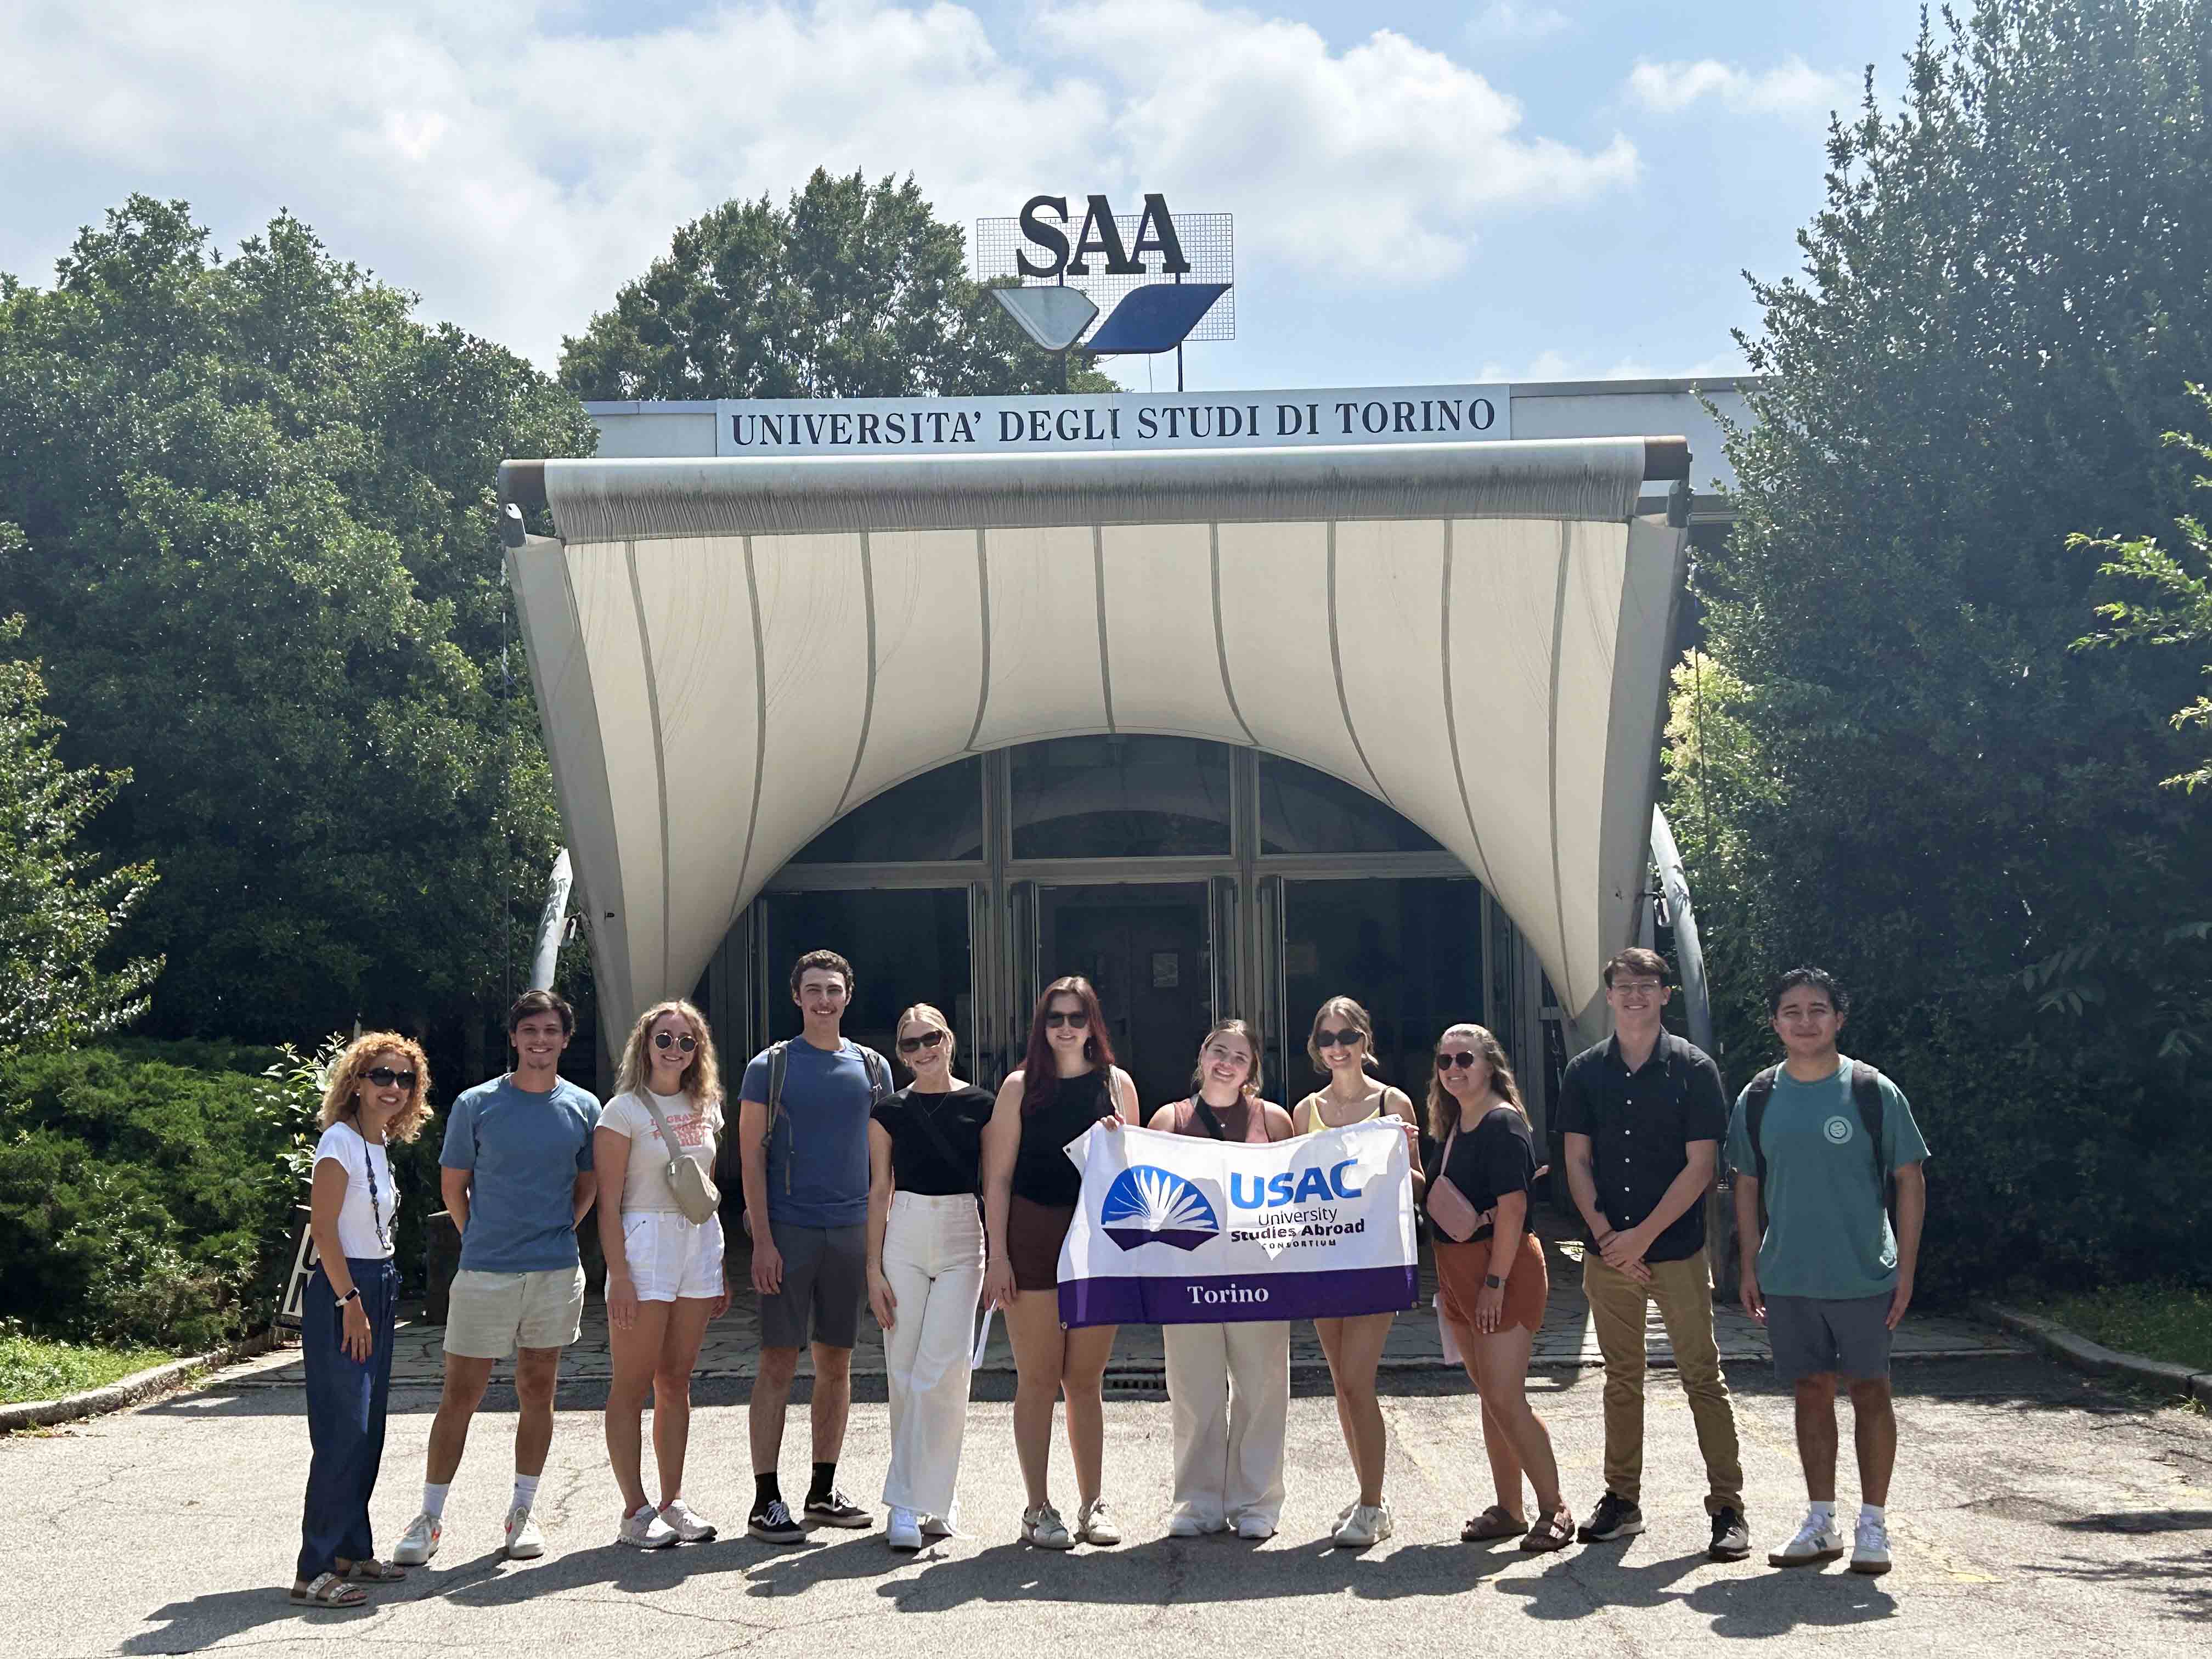 Students in front of the SAA - School of Management of the University of Torino in Torino, Italy.